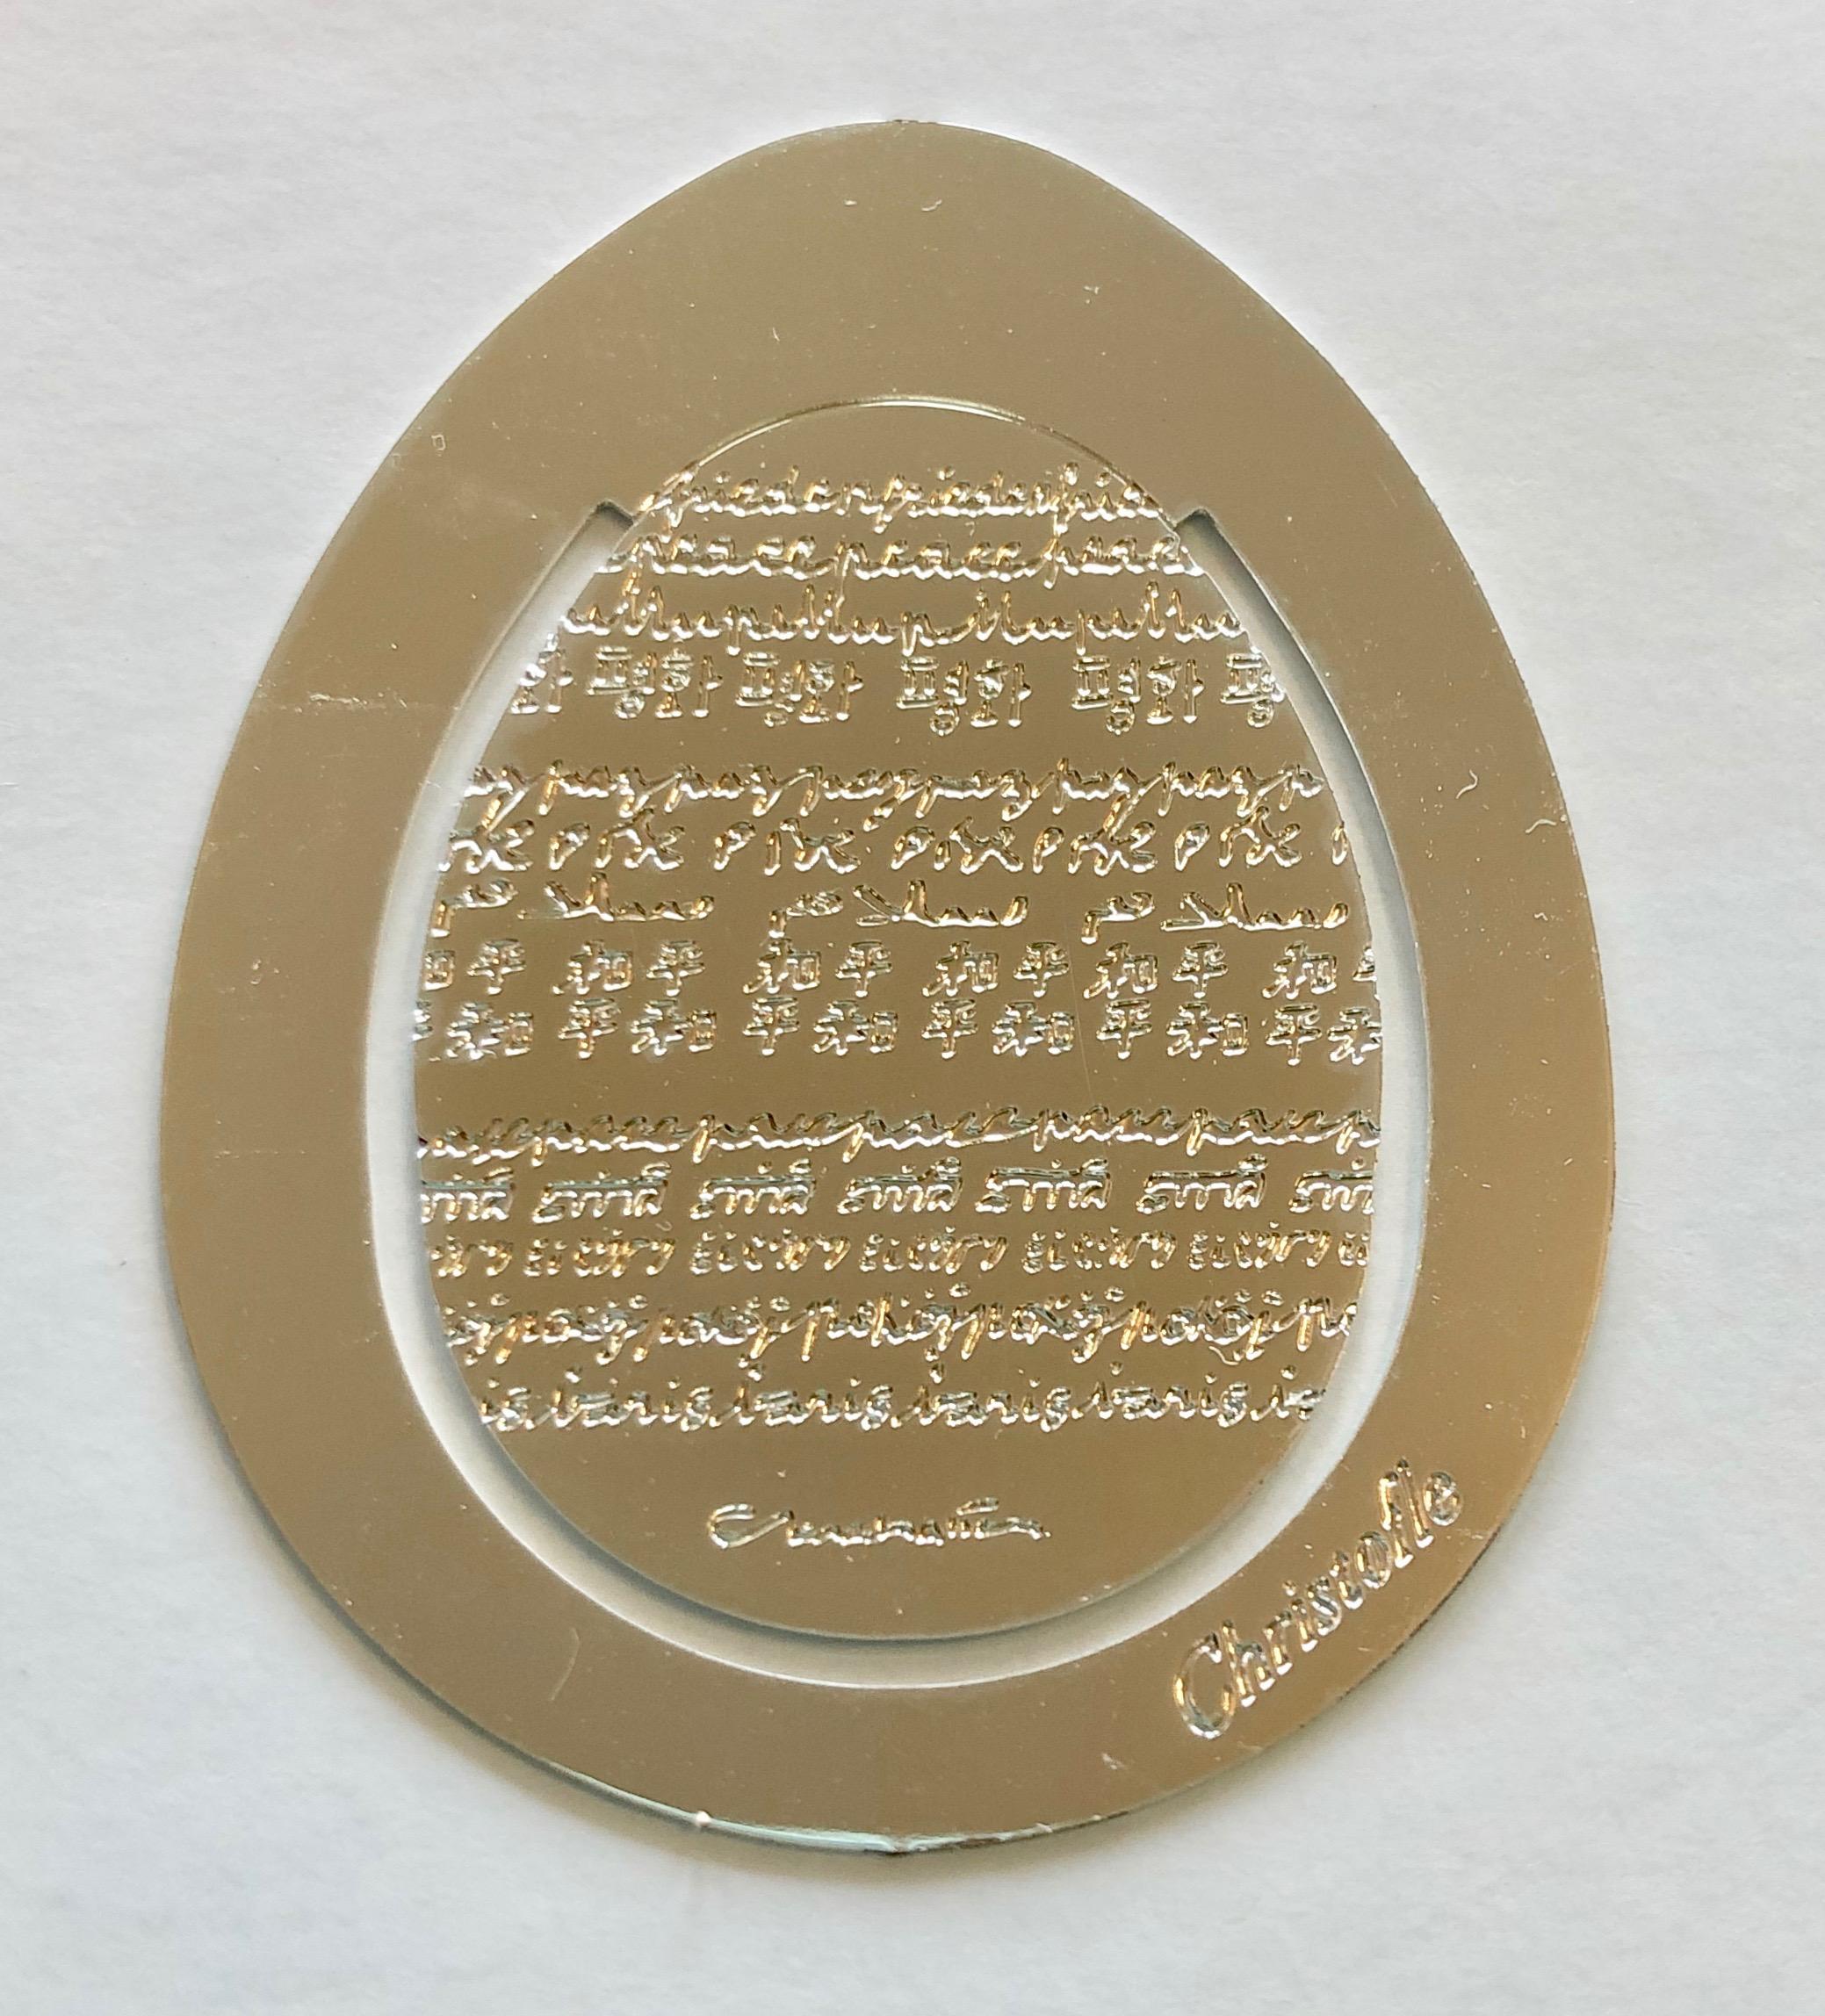 This is a wonderful French Christofle silver plated peace egg book page marker. The word peace is written on the egg in many different languages. It is new, never used and comes with it's case and envelope. (